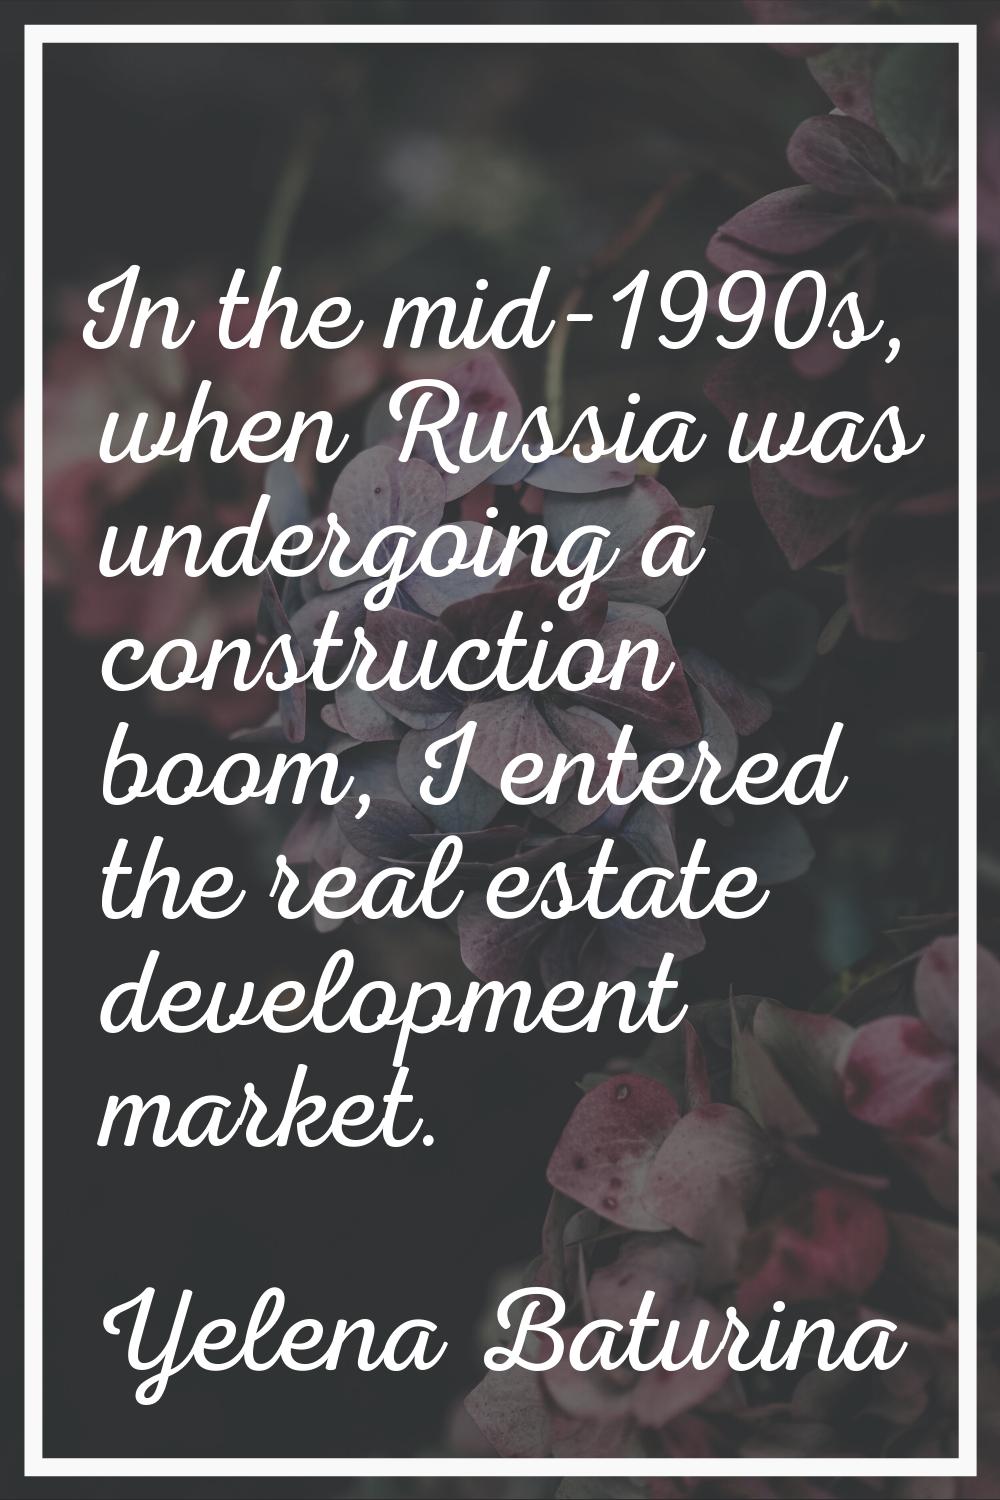 In the mid-1990s, when Russia was undergoing a construction boom, I entered the real estate develop